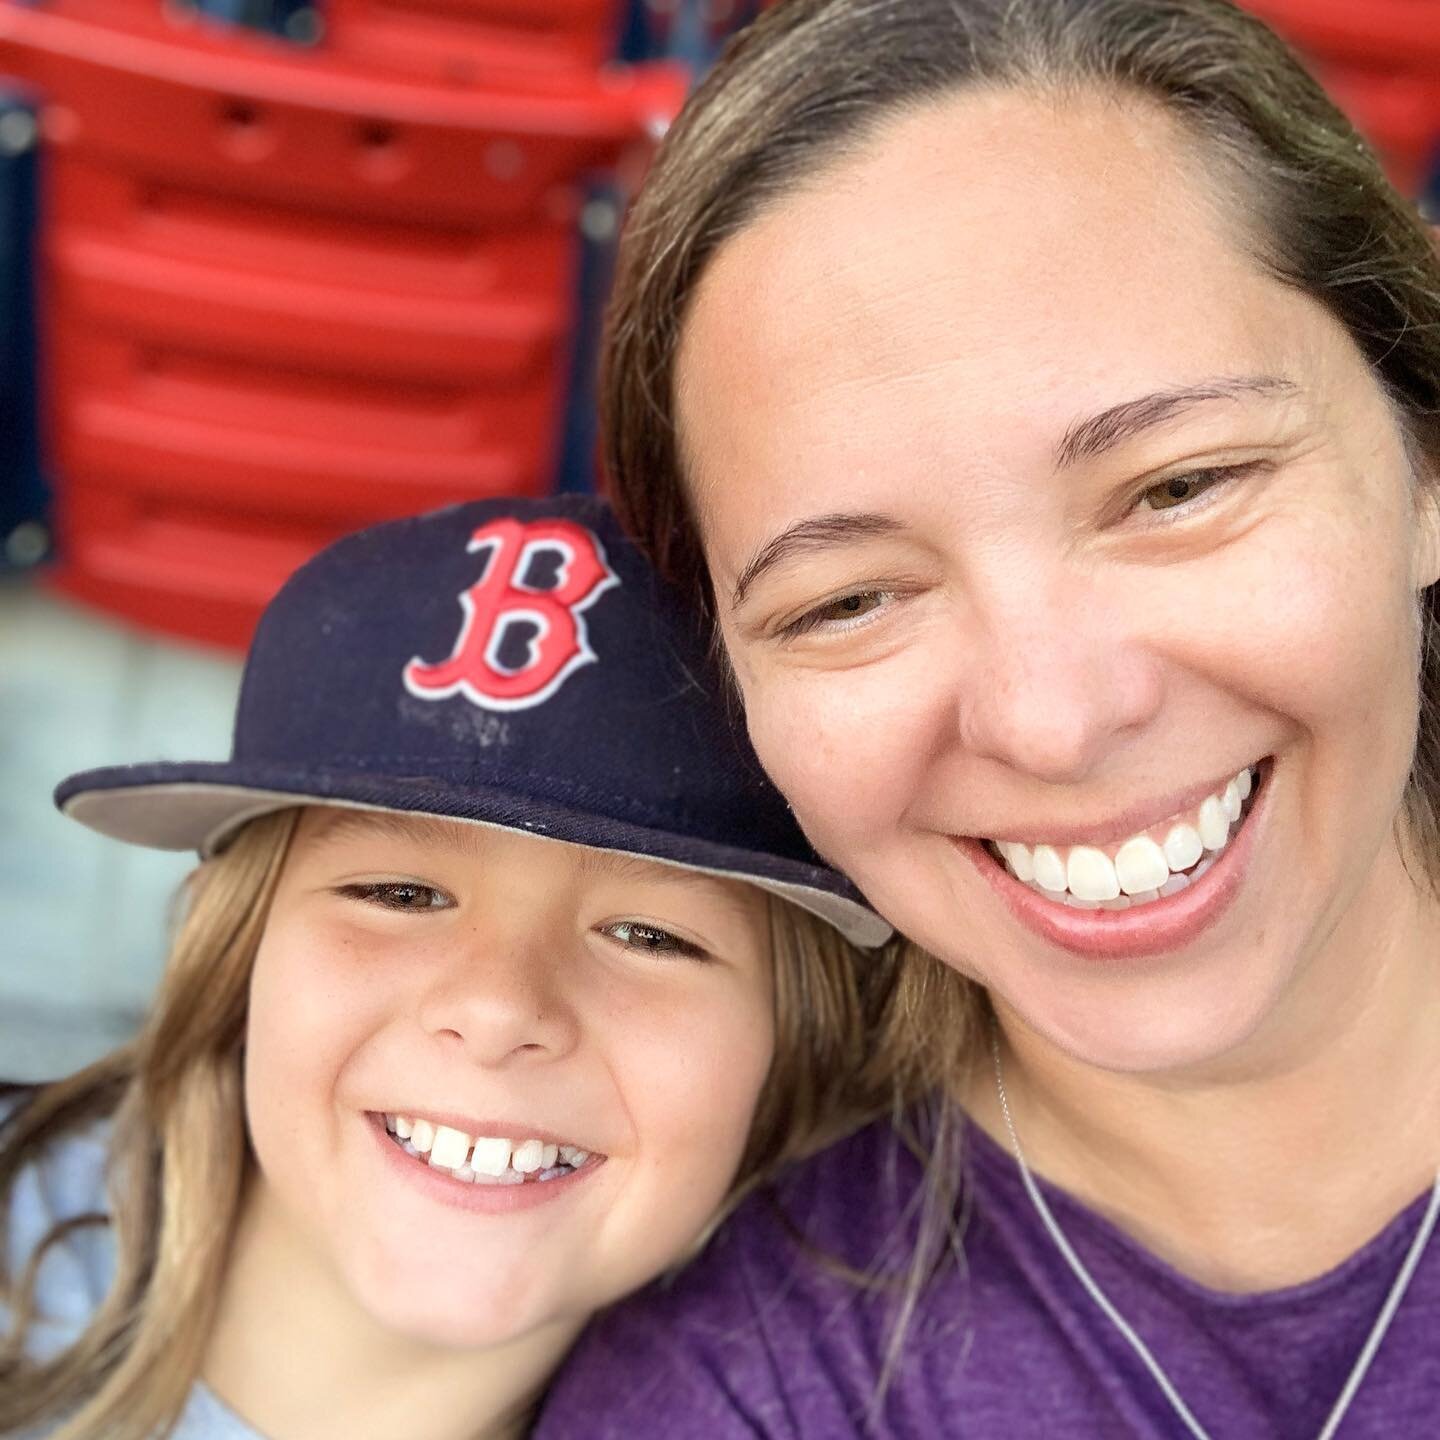 Happiness is&hellip; this. 💕 👩🏻 👦🏼 #motherson #baseballislife #letsgoredsox #redsoxnation #luckycharms